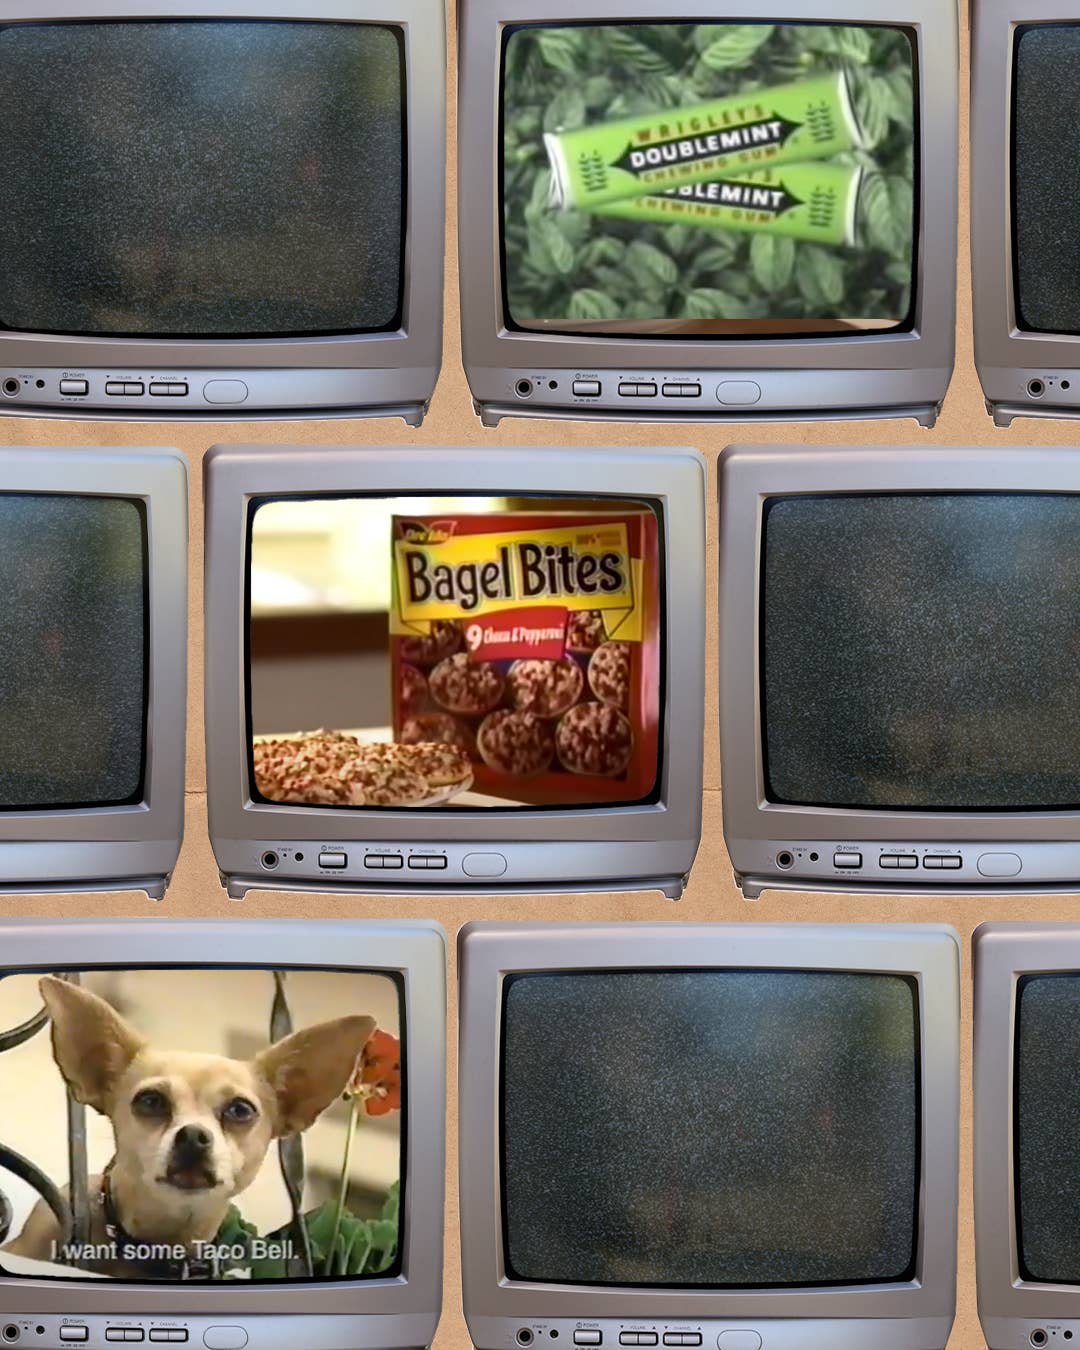 The Best—And Weirdest—’90s Food Commercials